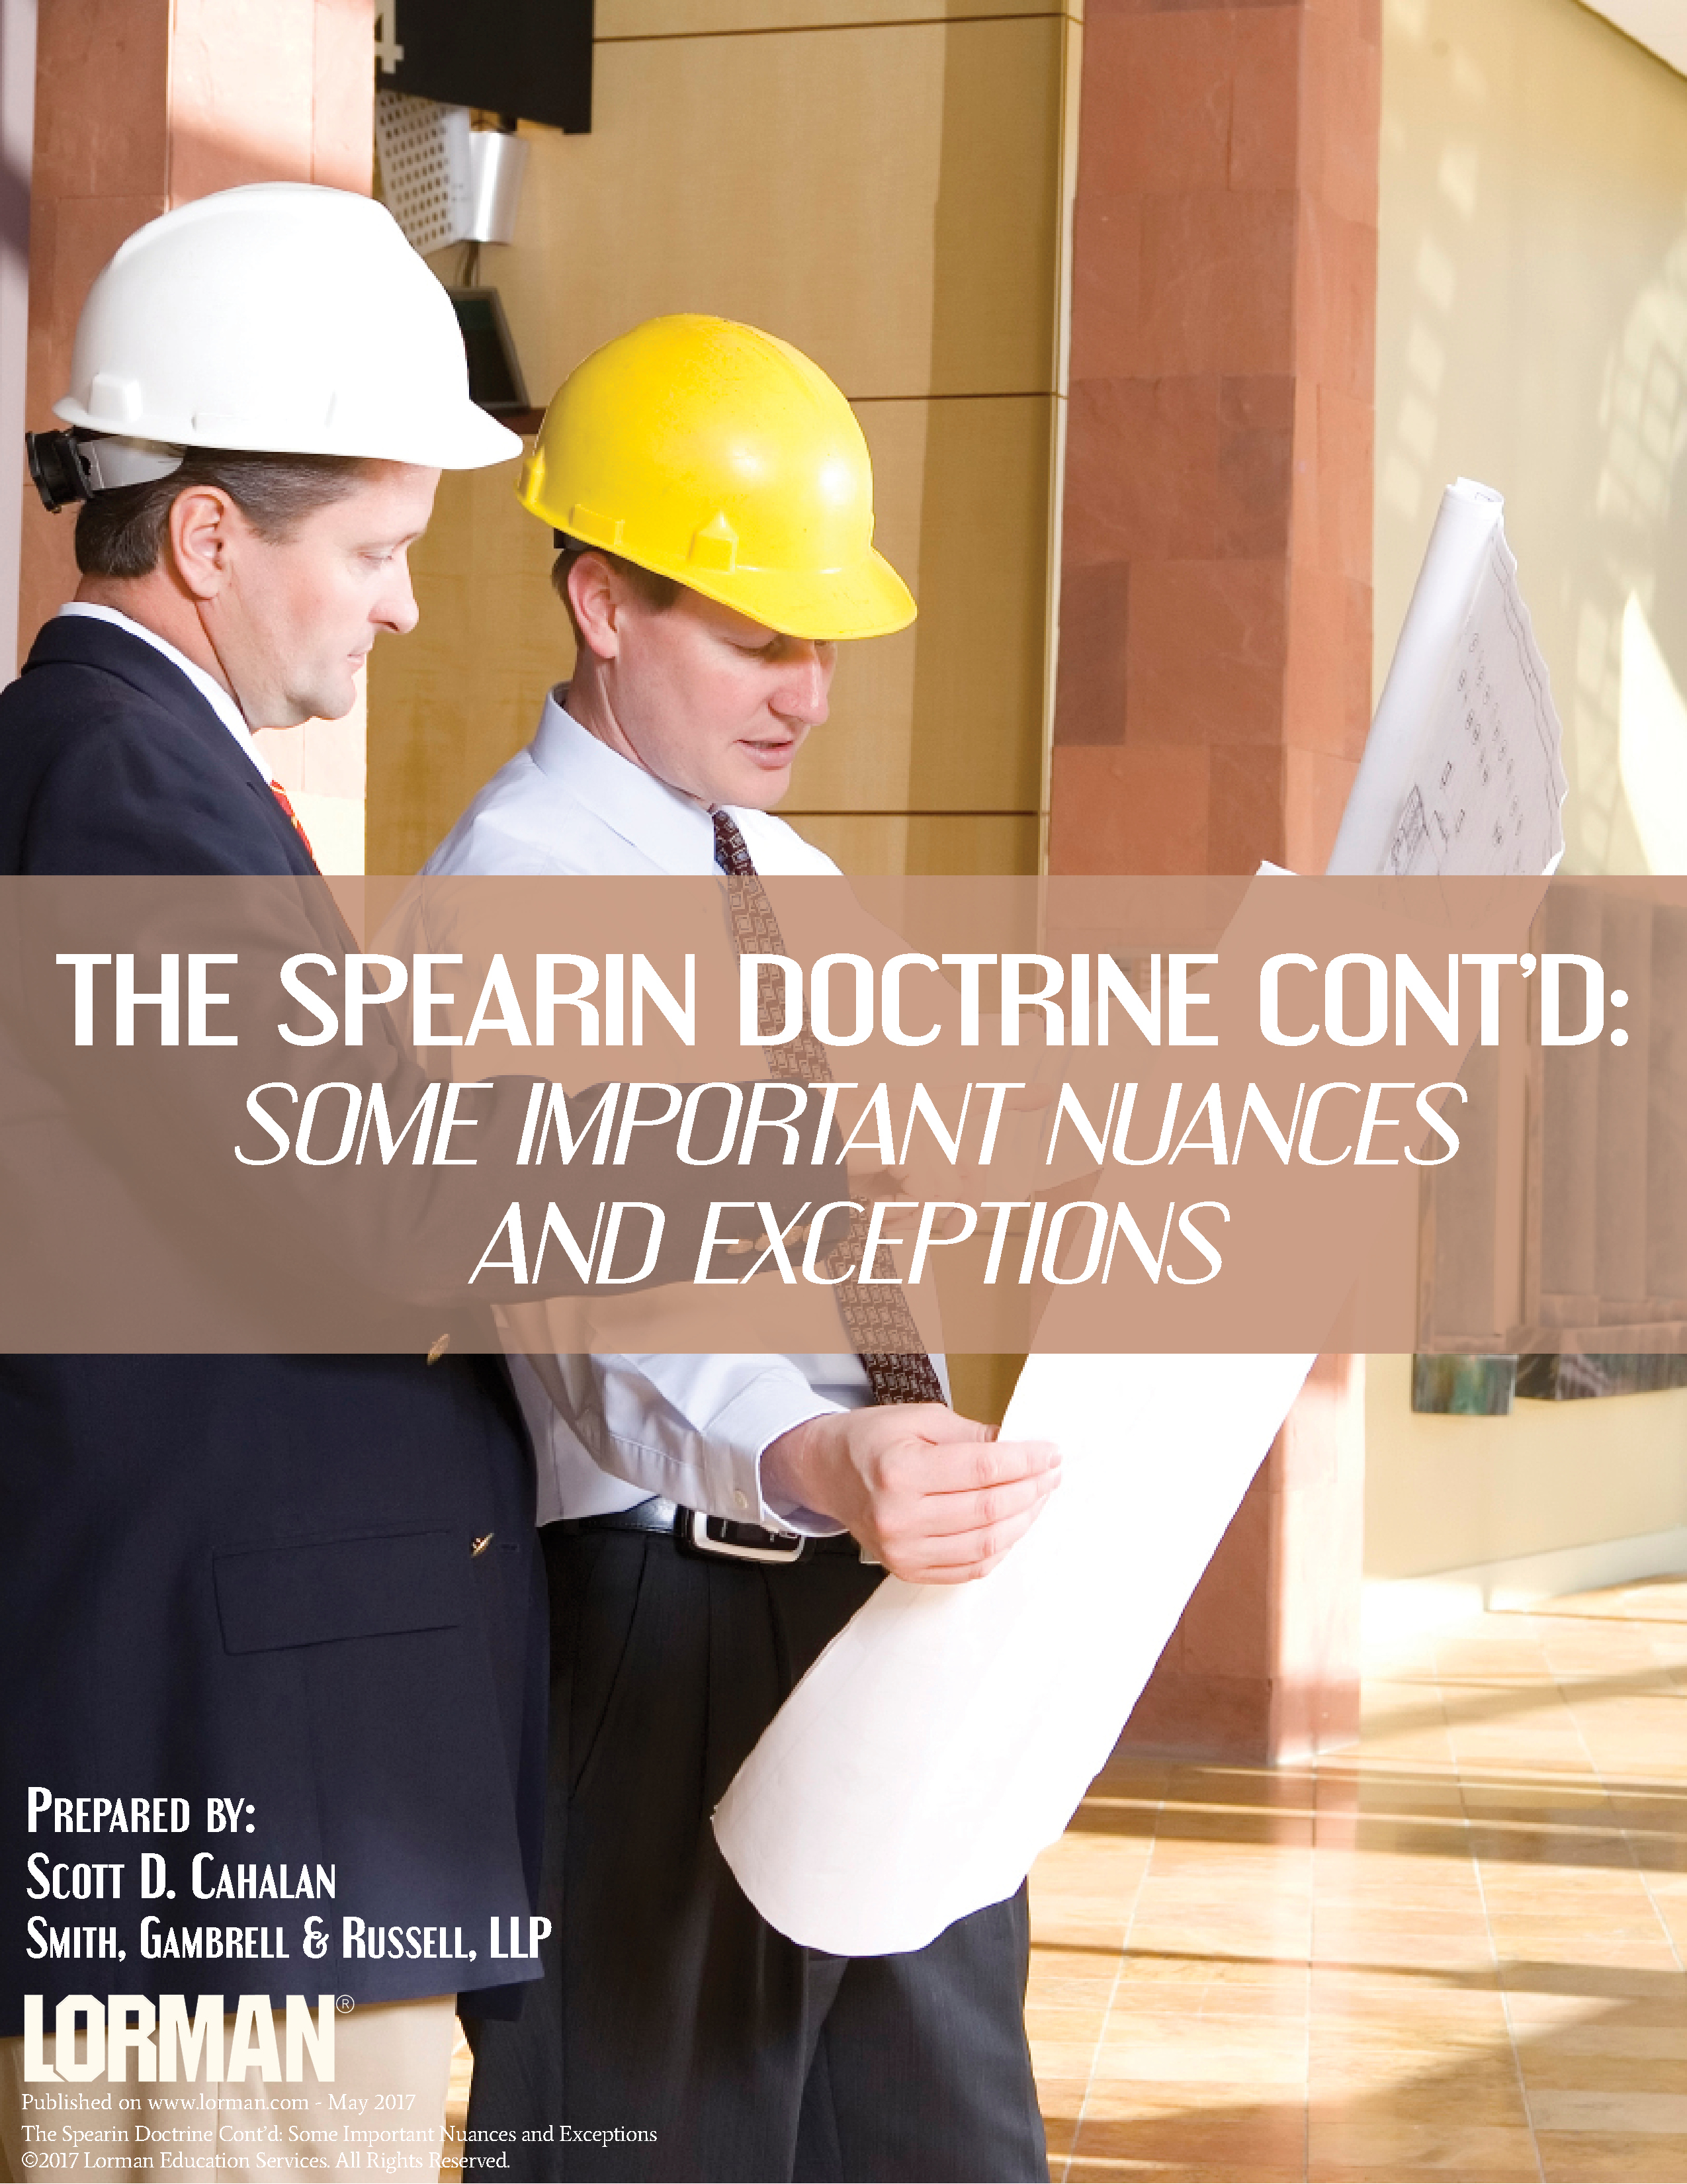 The Spearin Doctrine Cont’d - Some Important Nuances and Exceptions